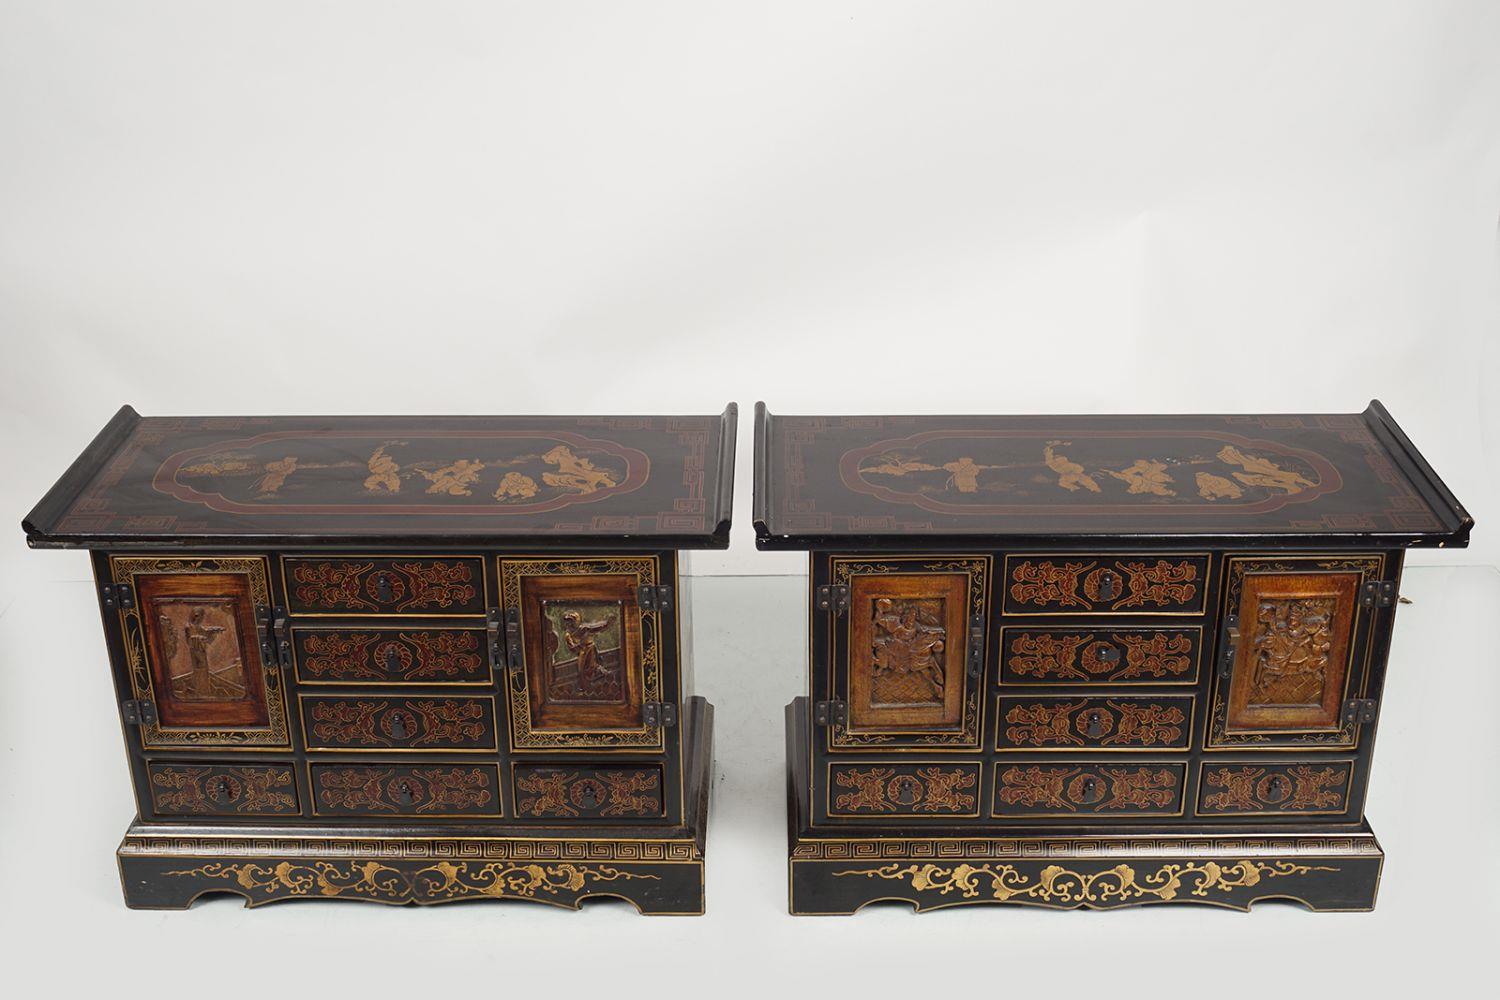 PAIR 19TH-CENTURY CHINESE LACQUERED CHESTS - Image 2 of 2